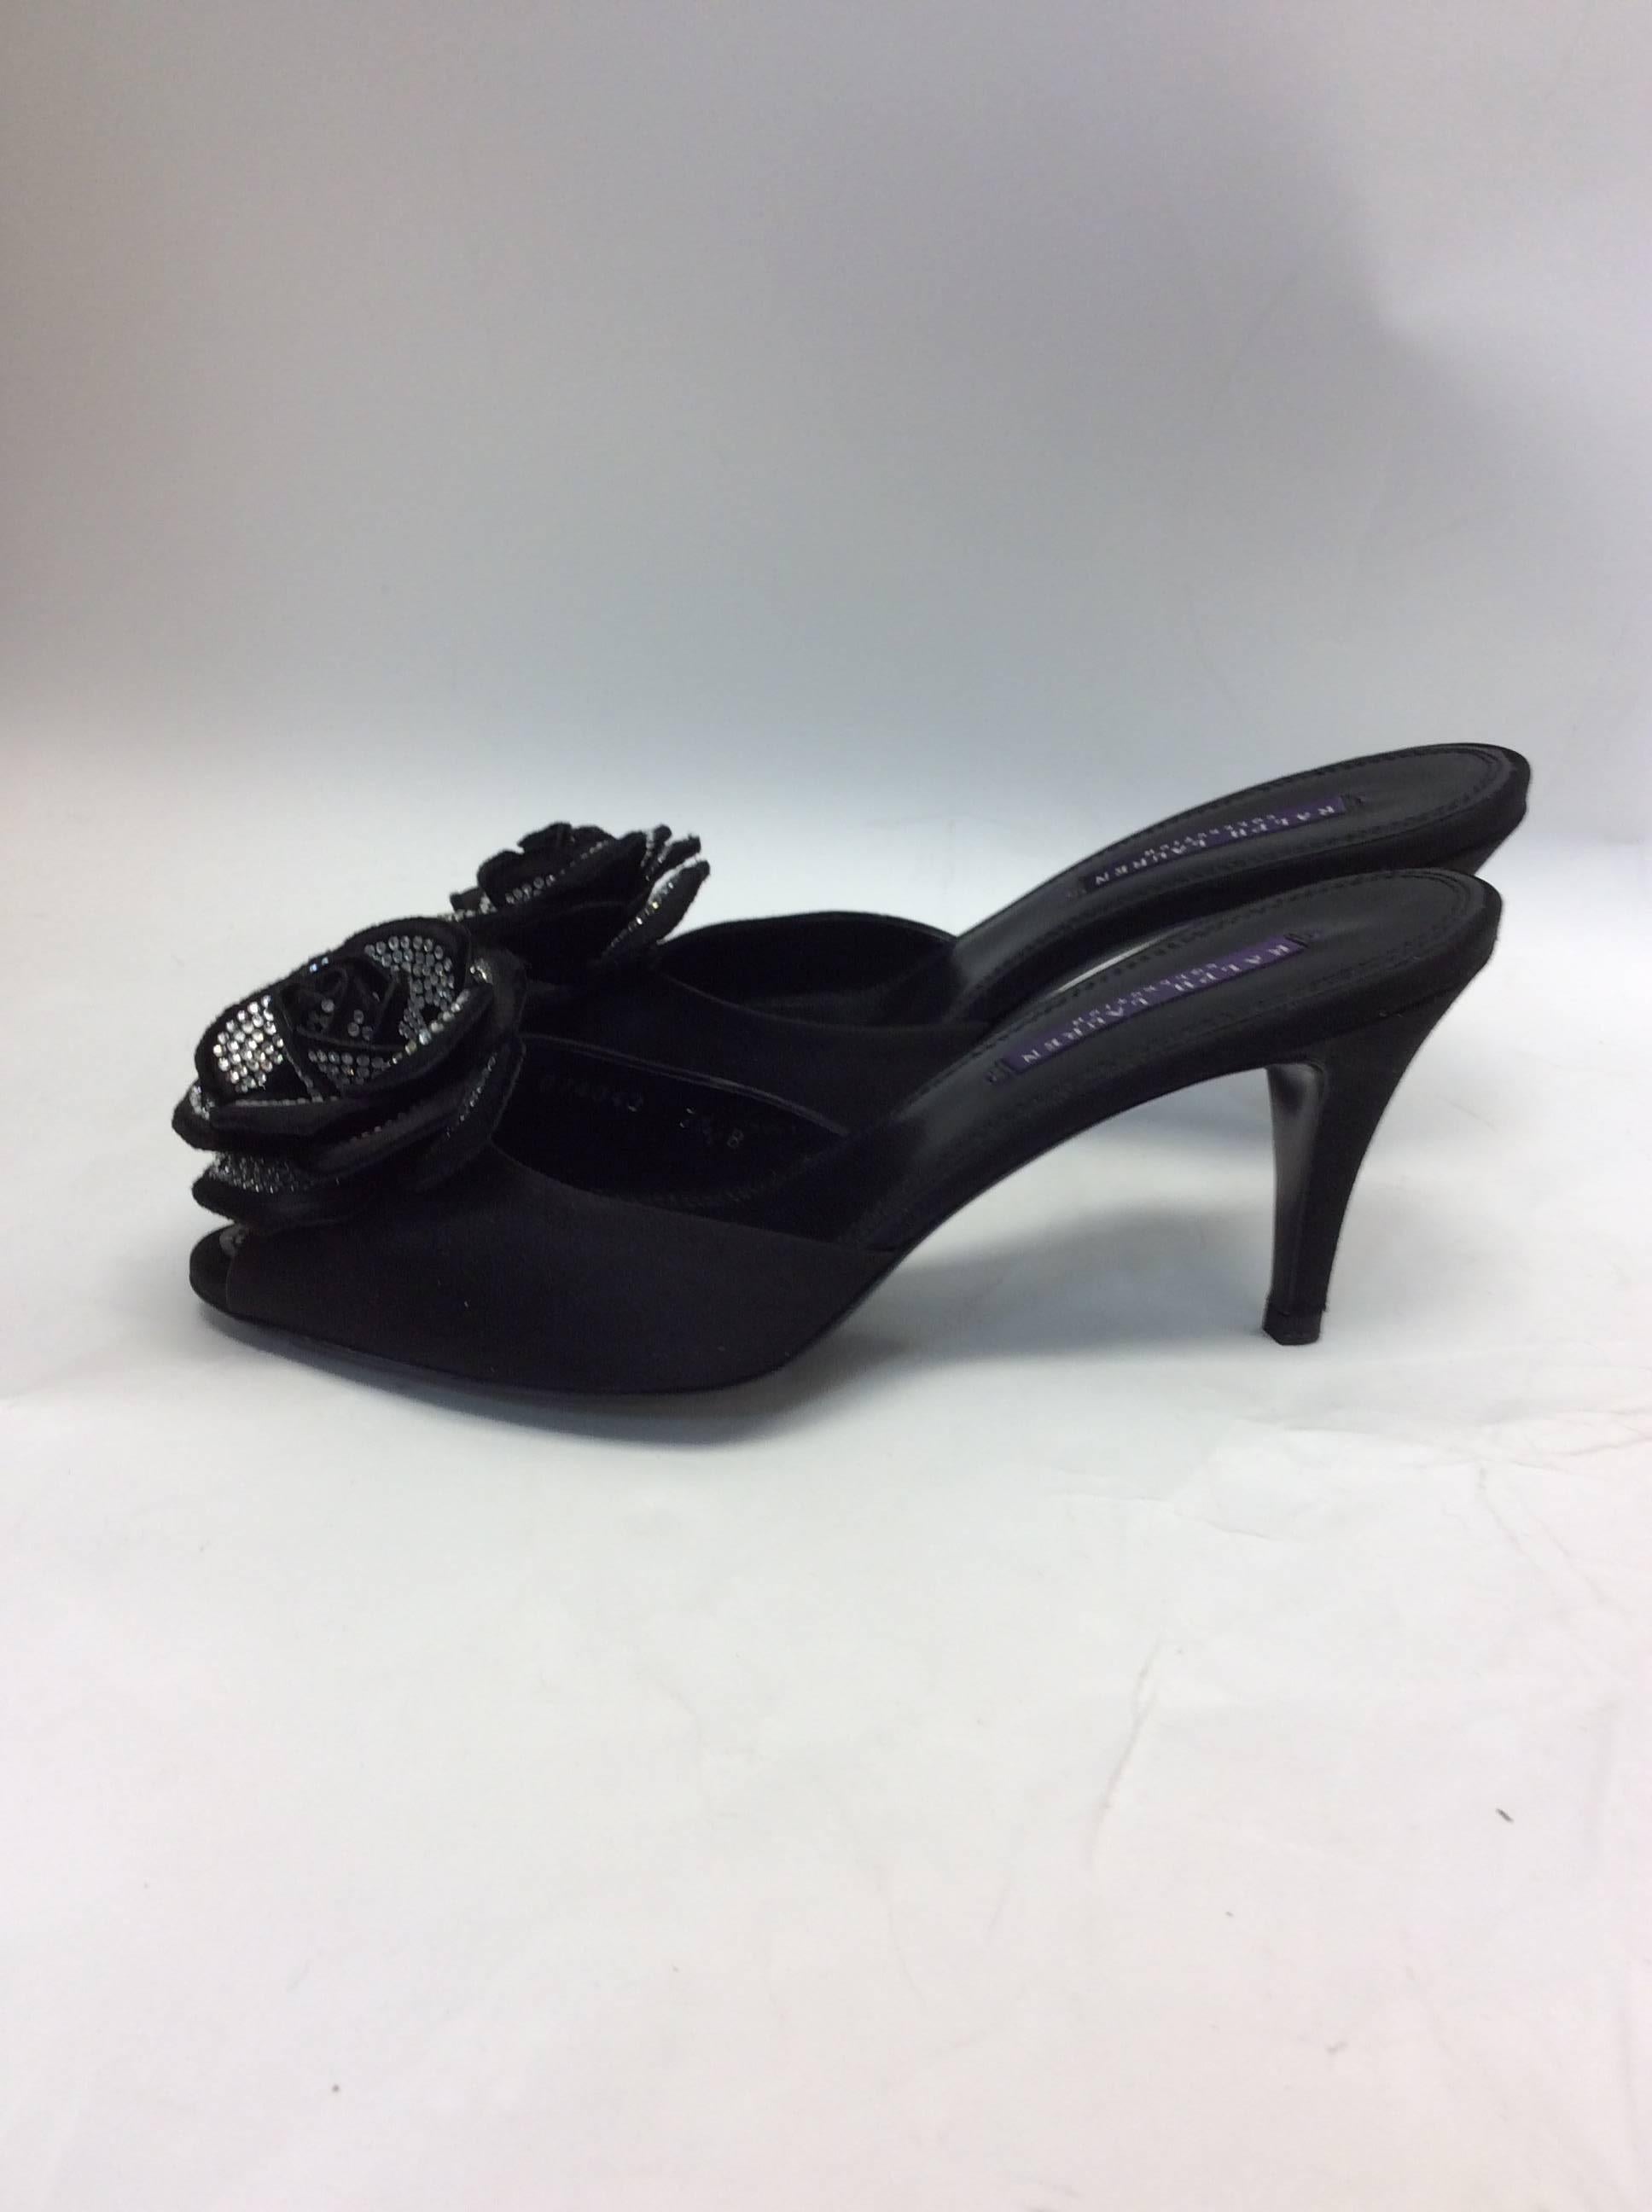 Ralph Lauren Floral Embellished Satin Pump
Size 7.5
$250
Made in Italy
